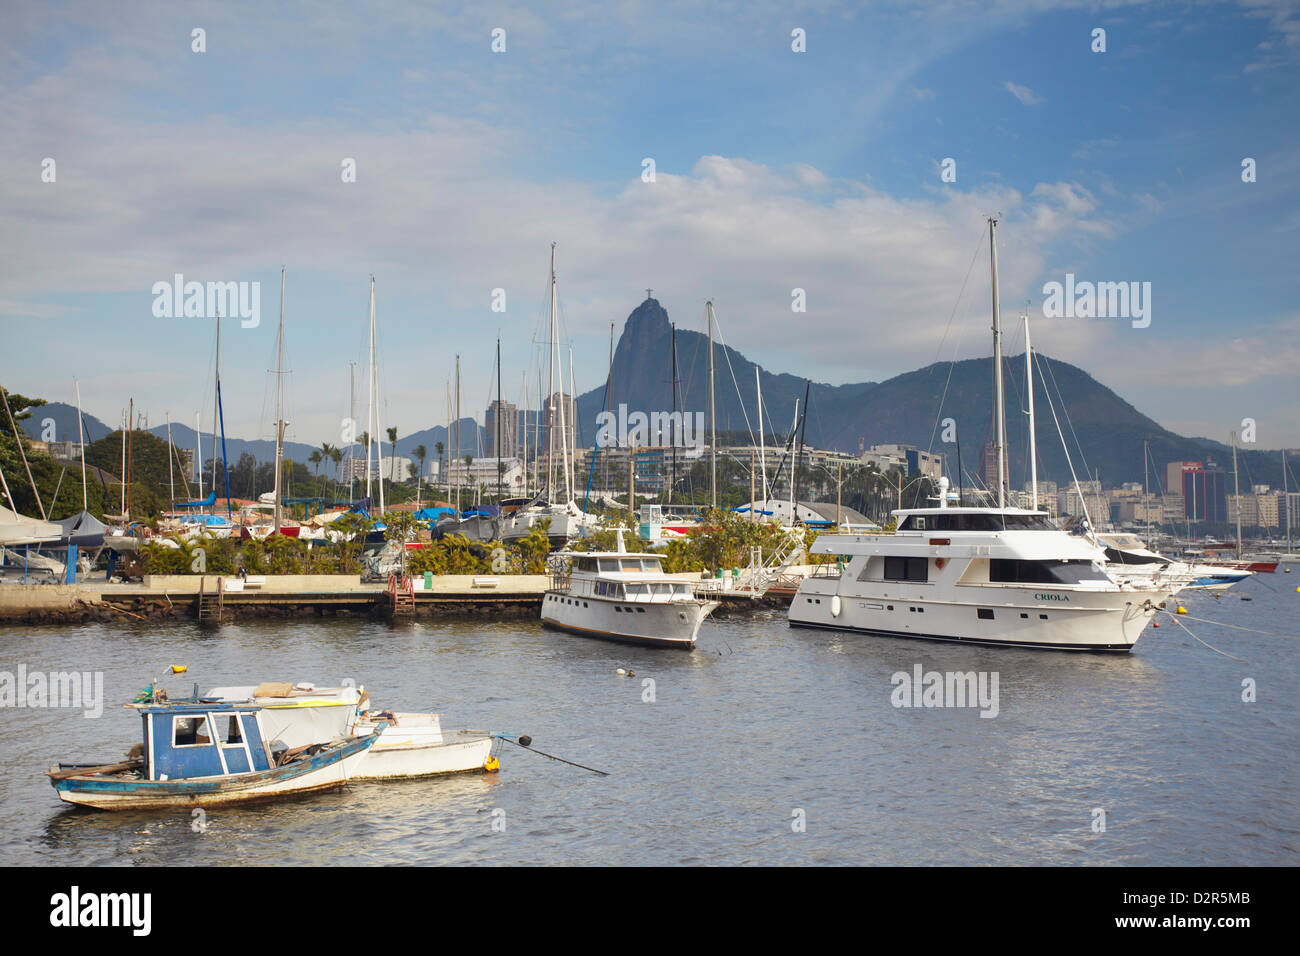 Boats in Guanabara Bay with Christ the Redeemer statue (Cristo Redentor) in the background, Urca, Rio de Janeiro, Brazil Stock Photo